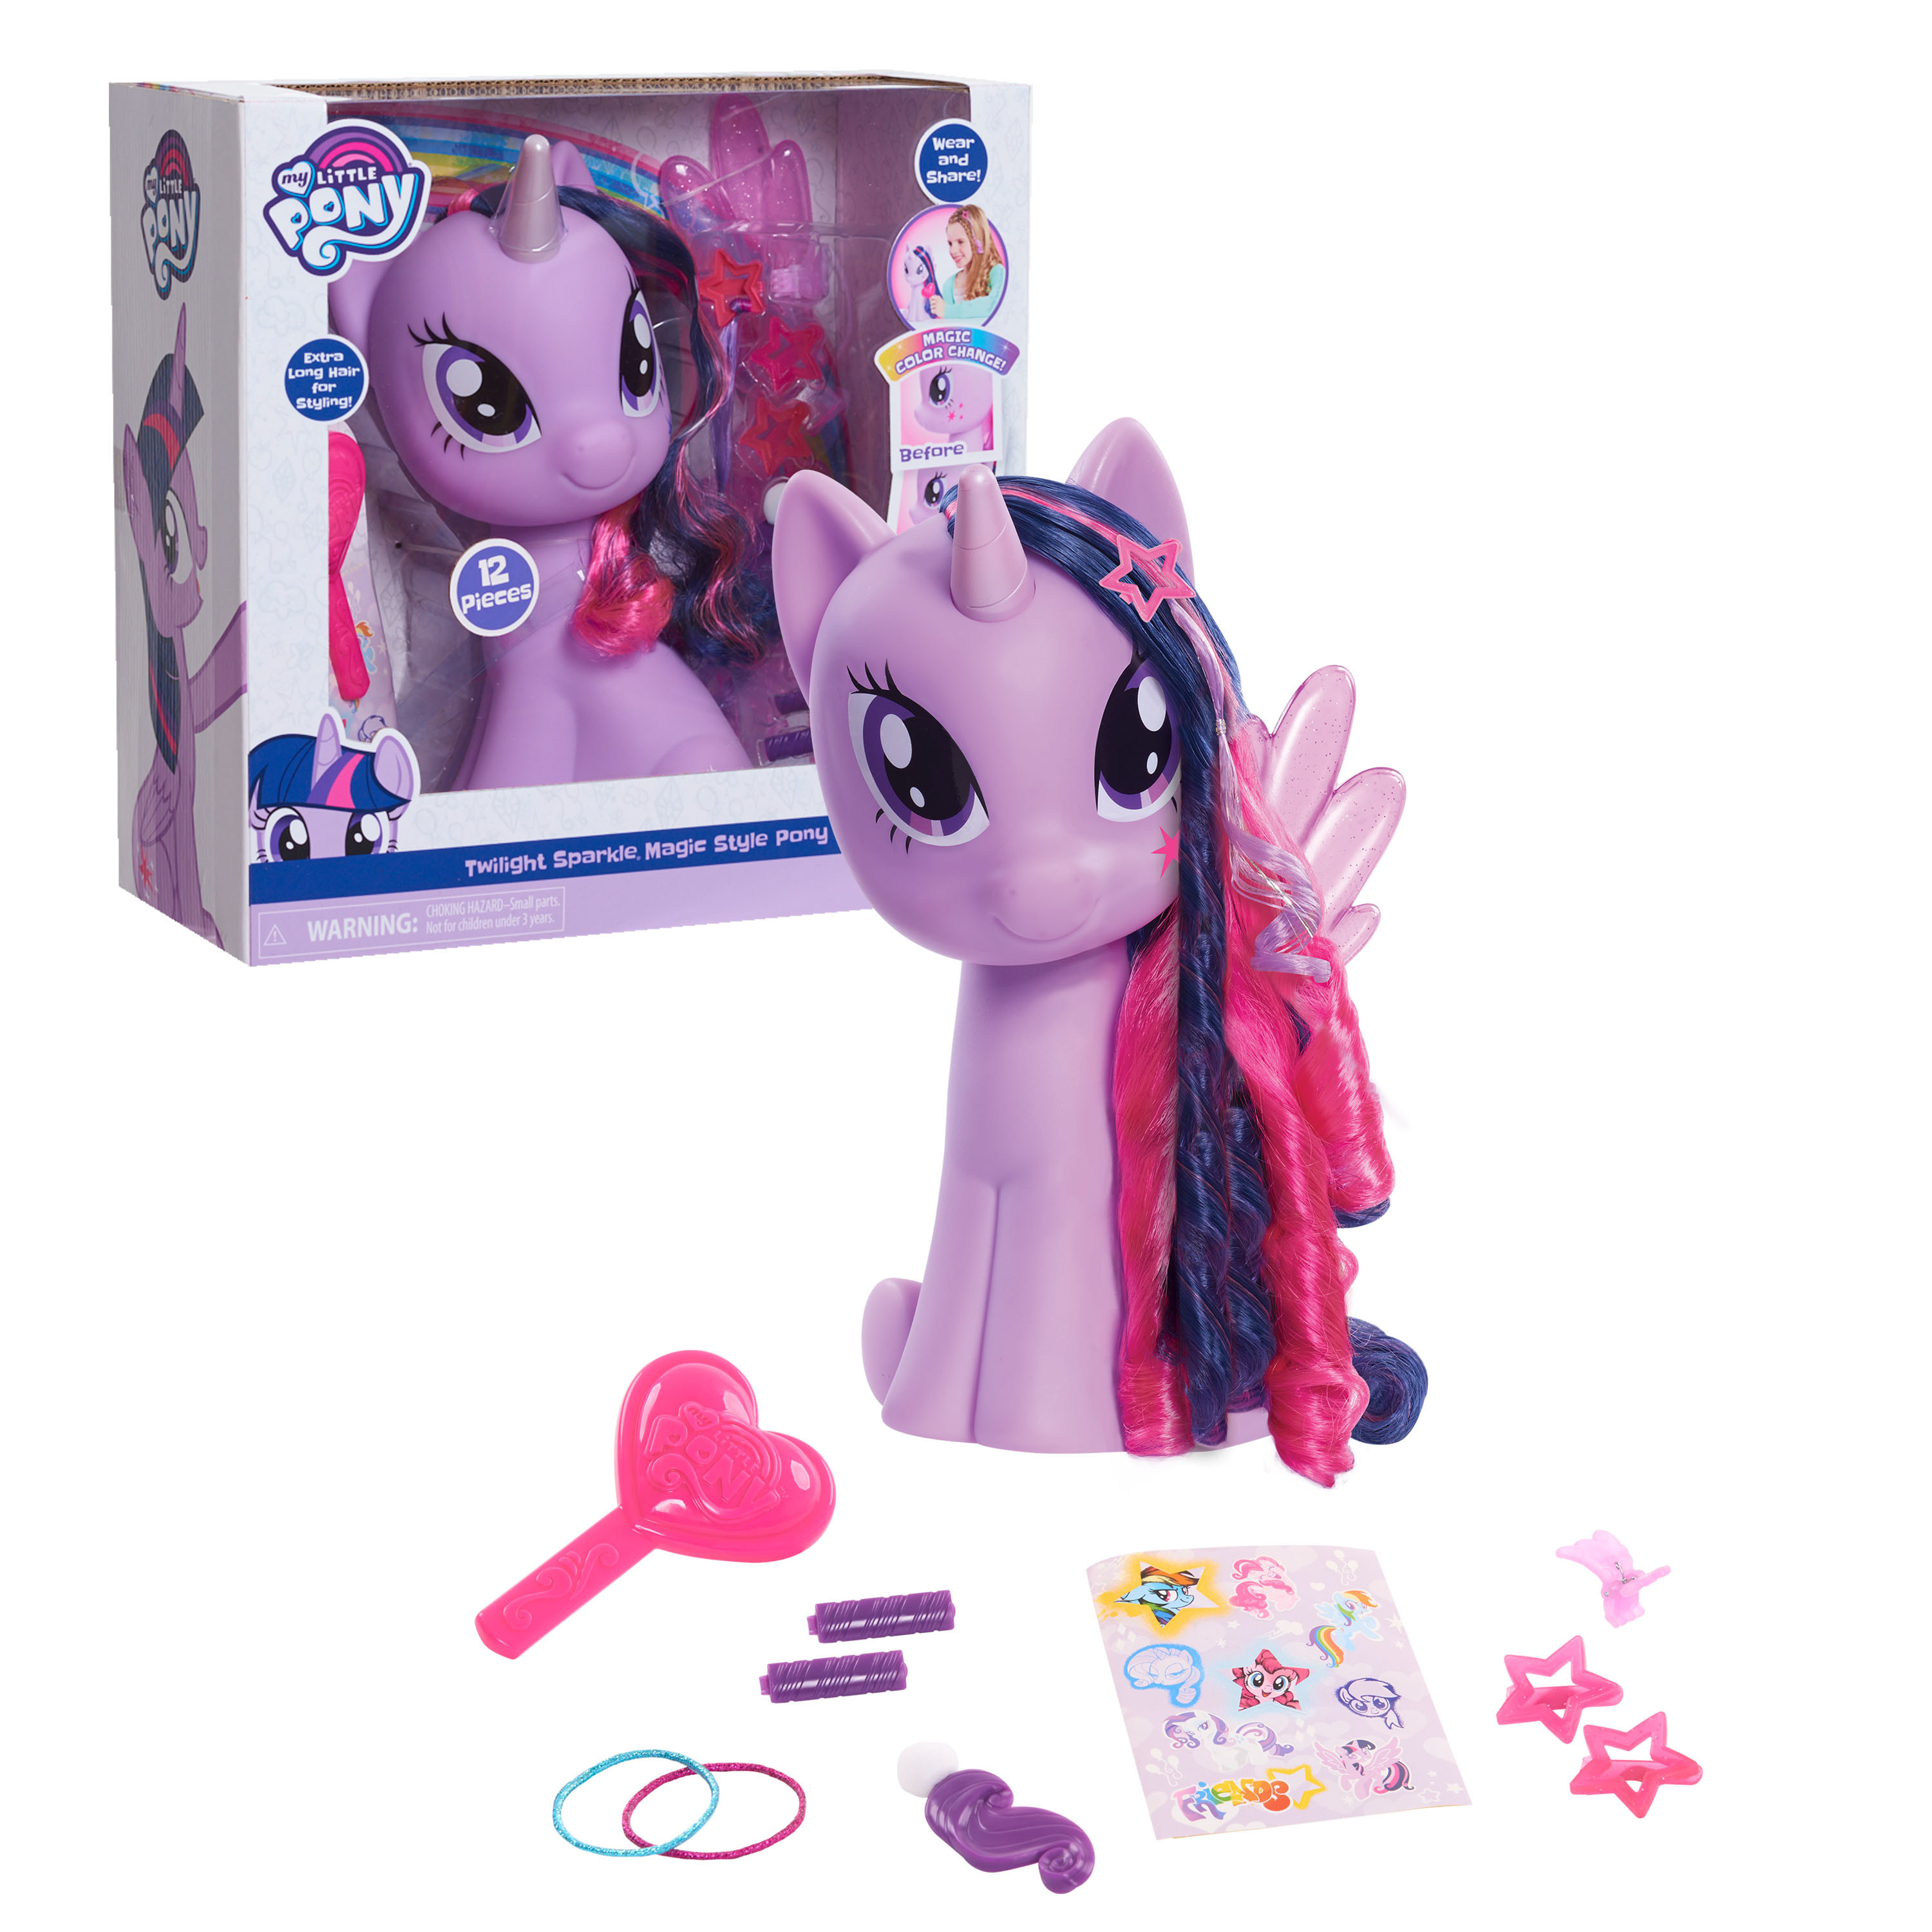 My Little Pony Twilight Sparkle Styling Head with Color Change, 12 Pieces, Purple Unicorn, Pretend Play Toys for Girls,  Kids Toys for Ages 3 Up, Gifts and Presents - image 1 of 3